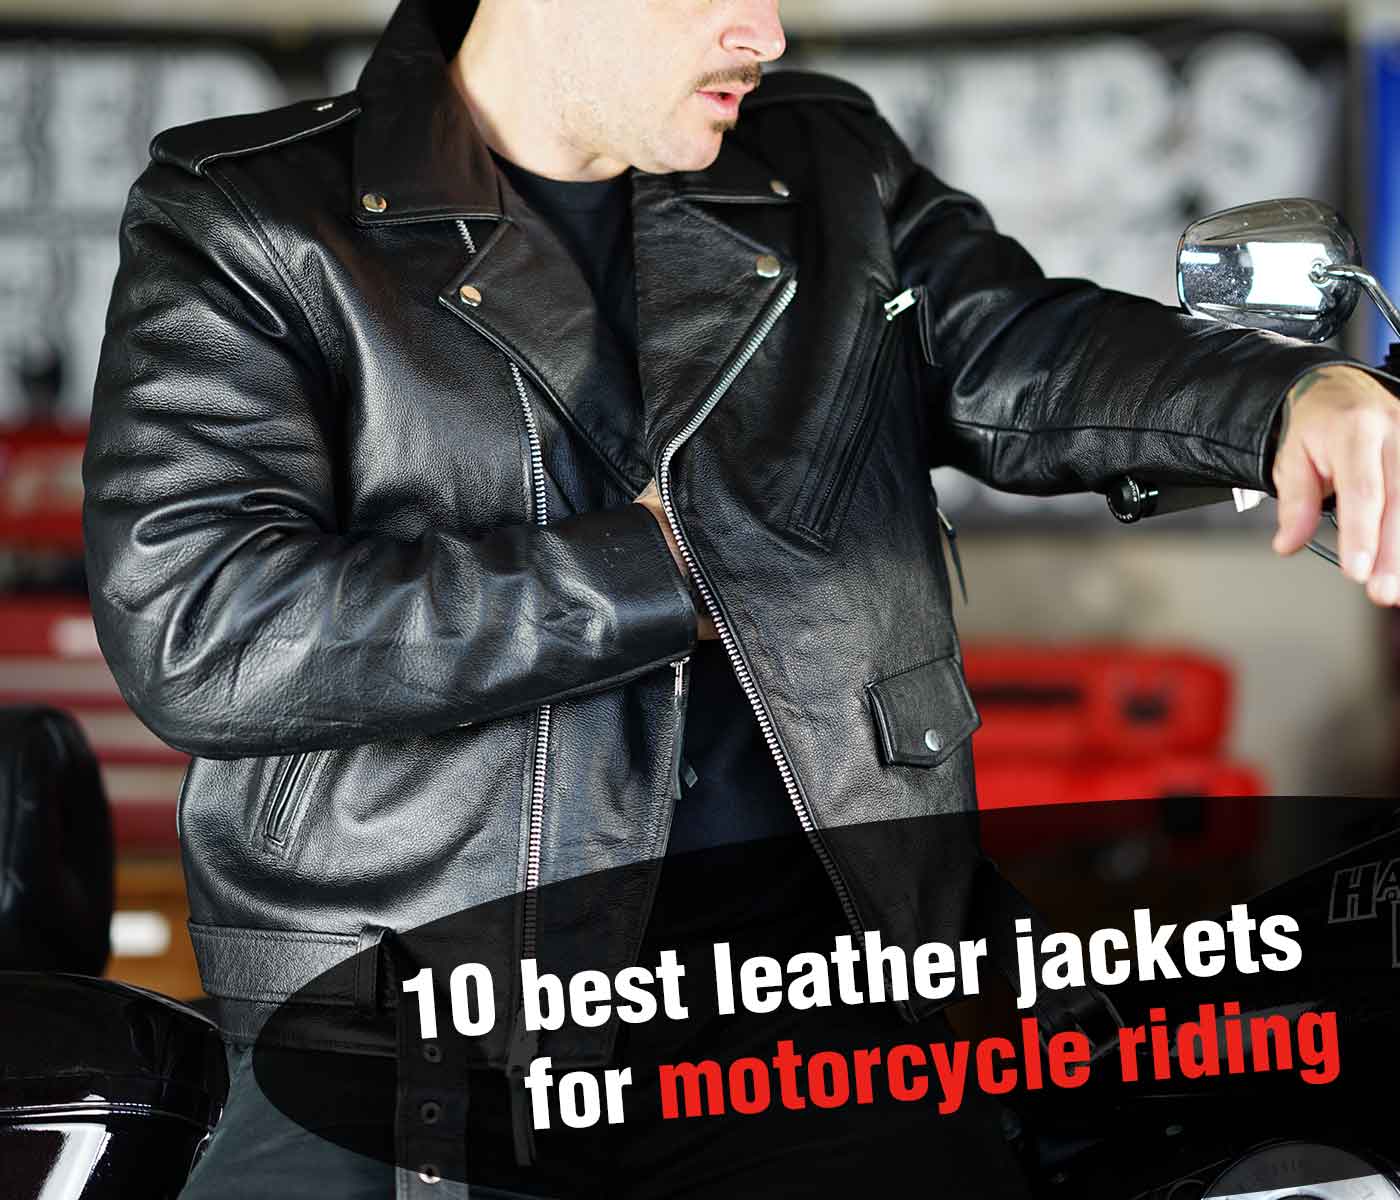 10 Best Leather Jackets for Motorcycle Riding